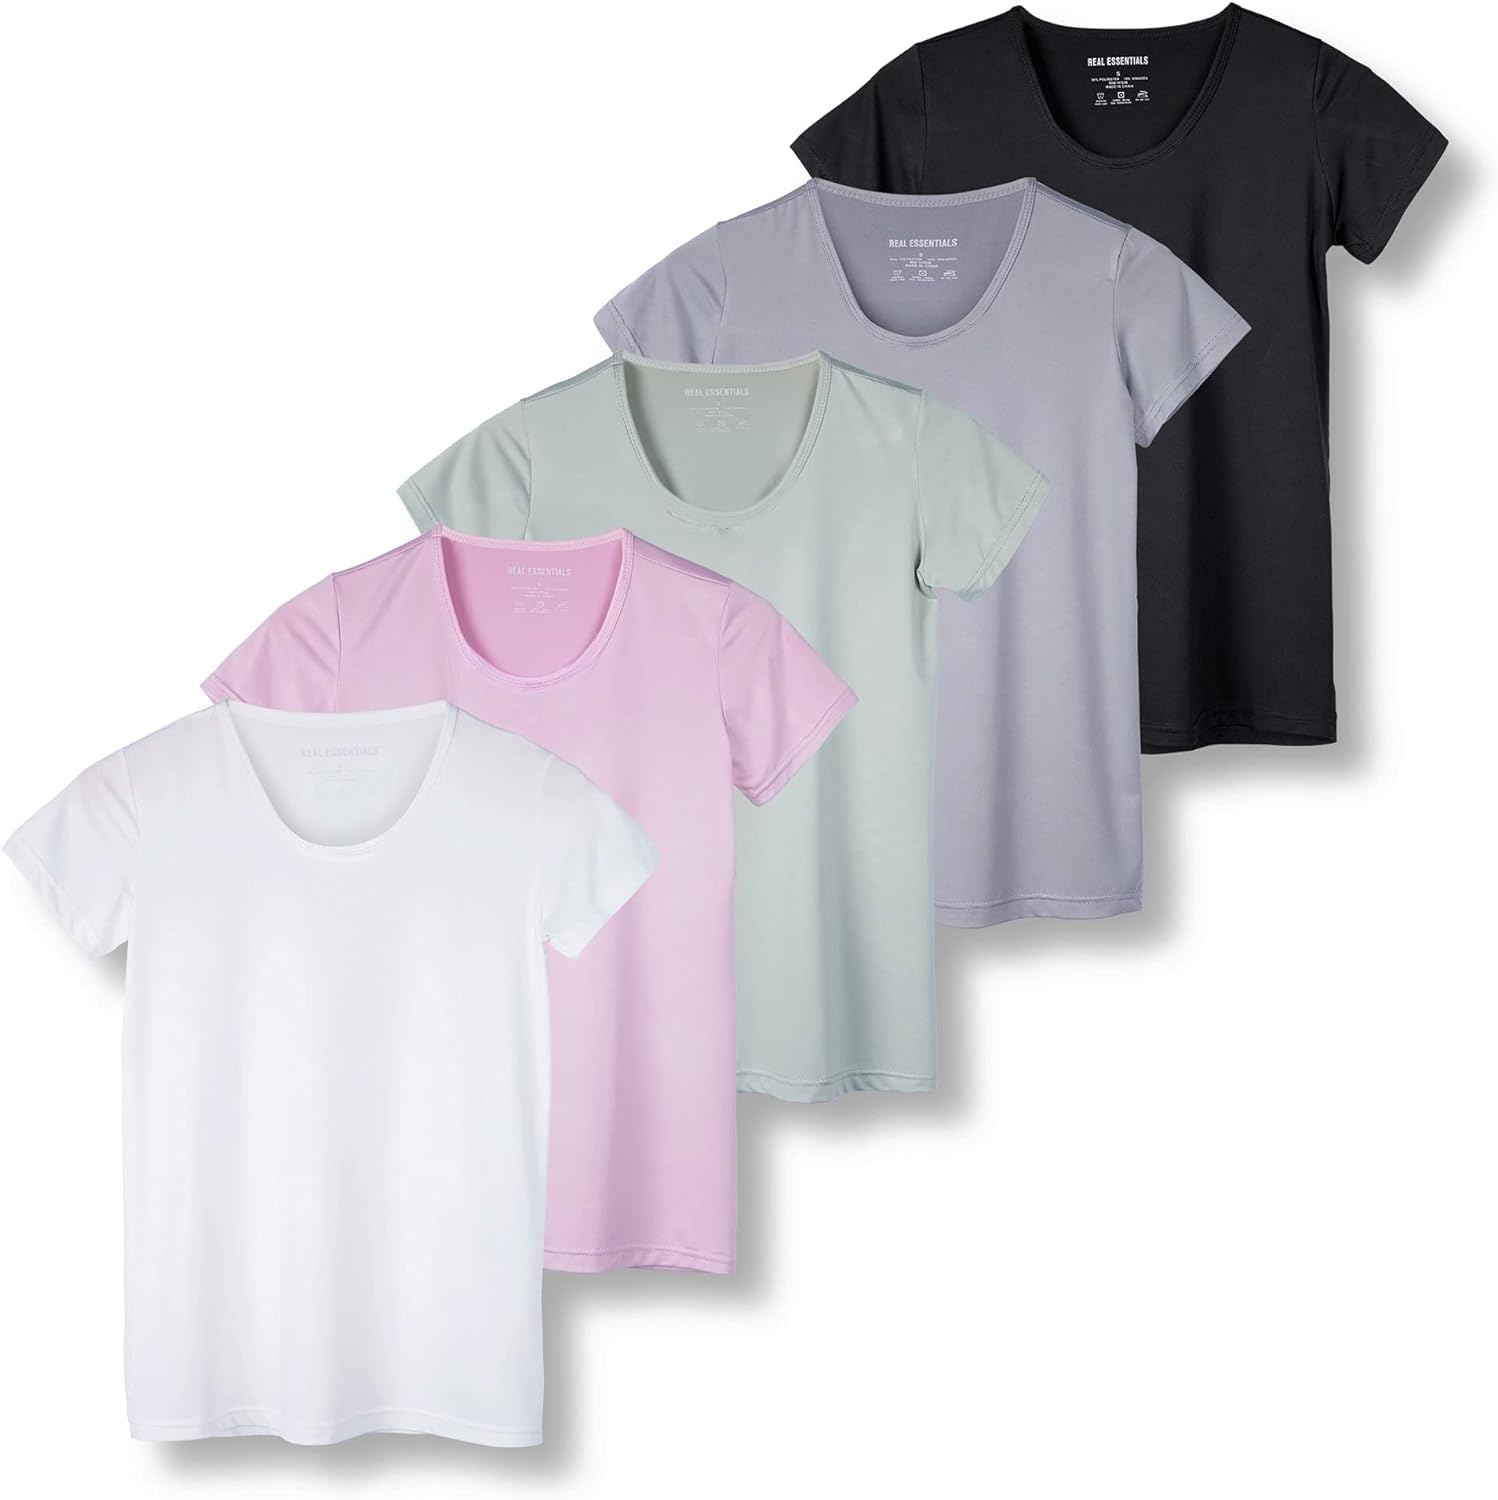 5 Pack: Womens Plus Size Just My Quick Dry Fit Dri Fit Active Wear Yoga Workout Athletic Tops Clothes Running Gym Exercise Ladies Short Sleeve Crew Scoop Neck Moisture Wicking Tees T-Shirt- Set 9, 3X